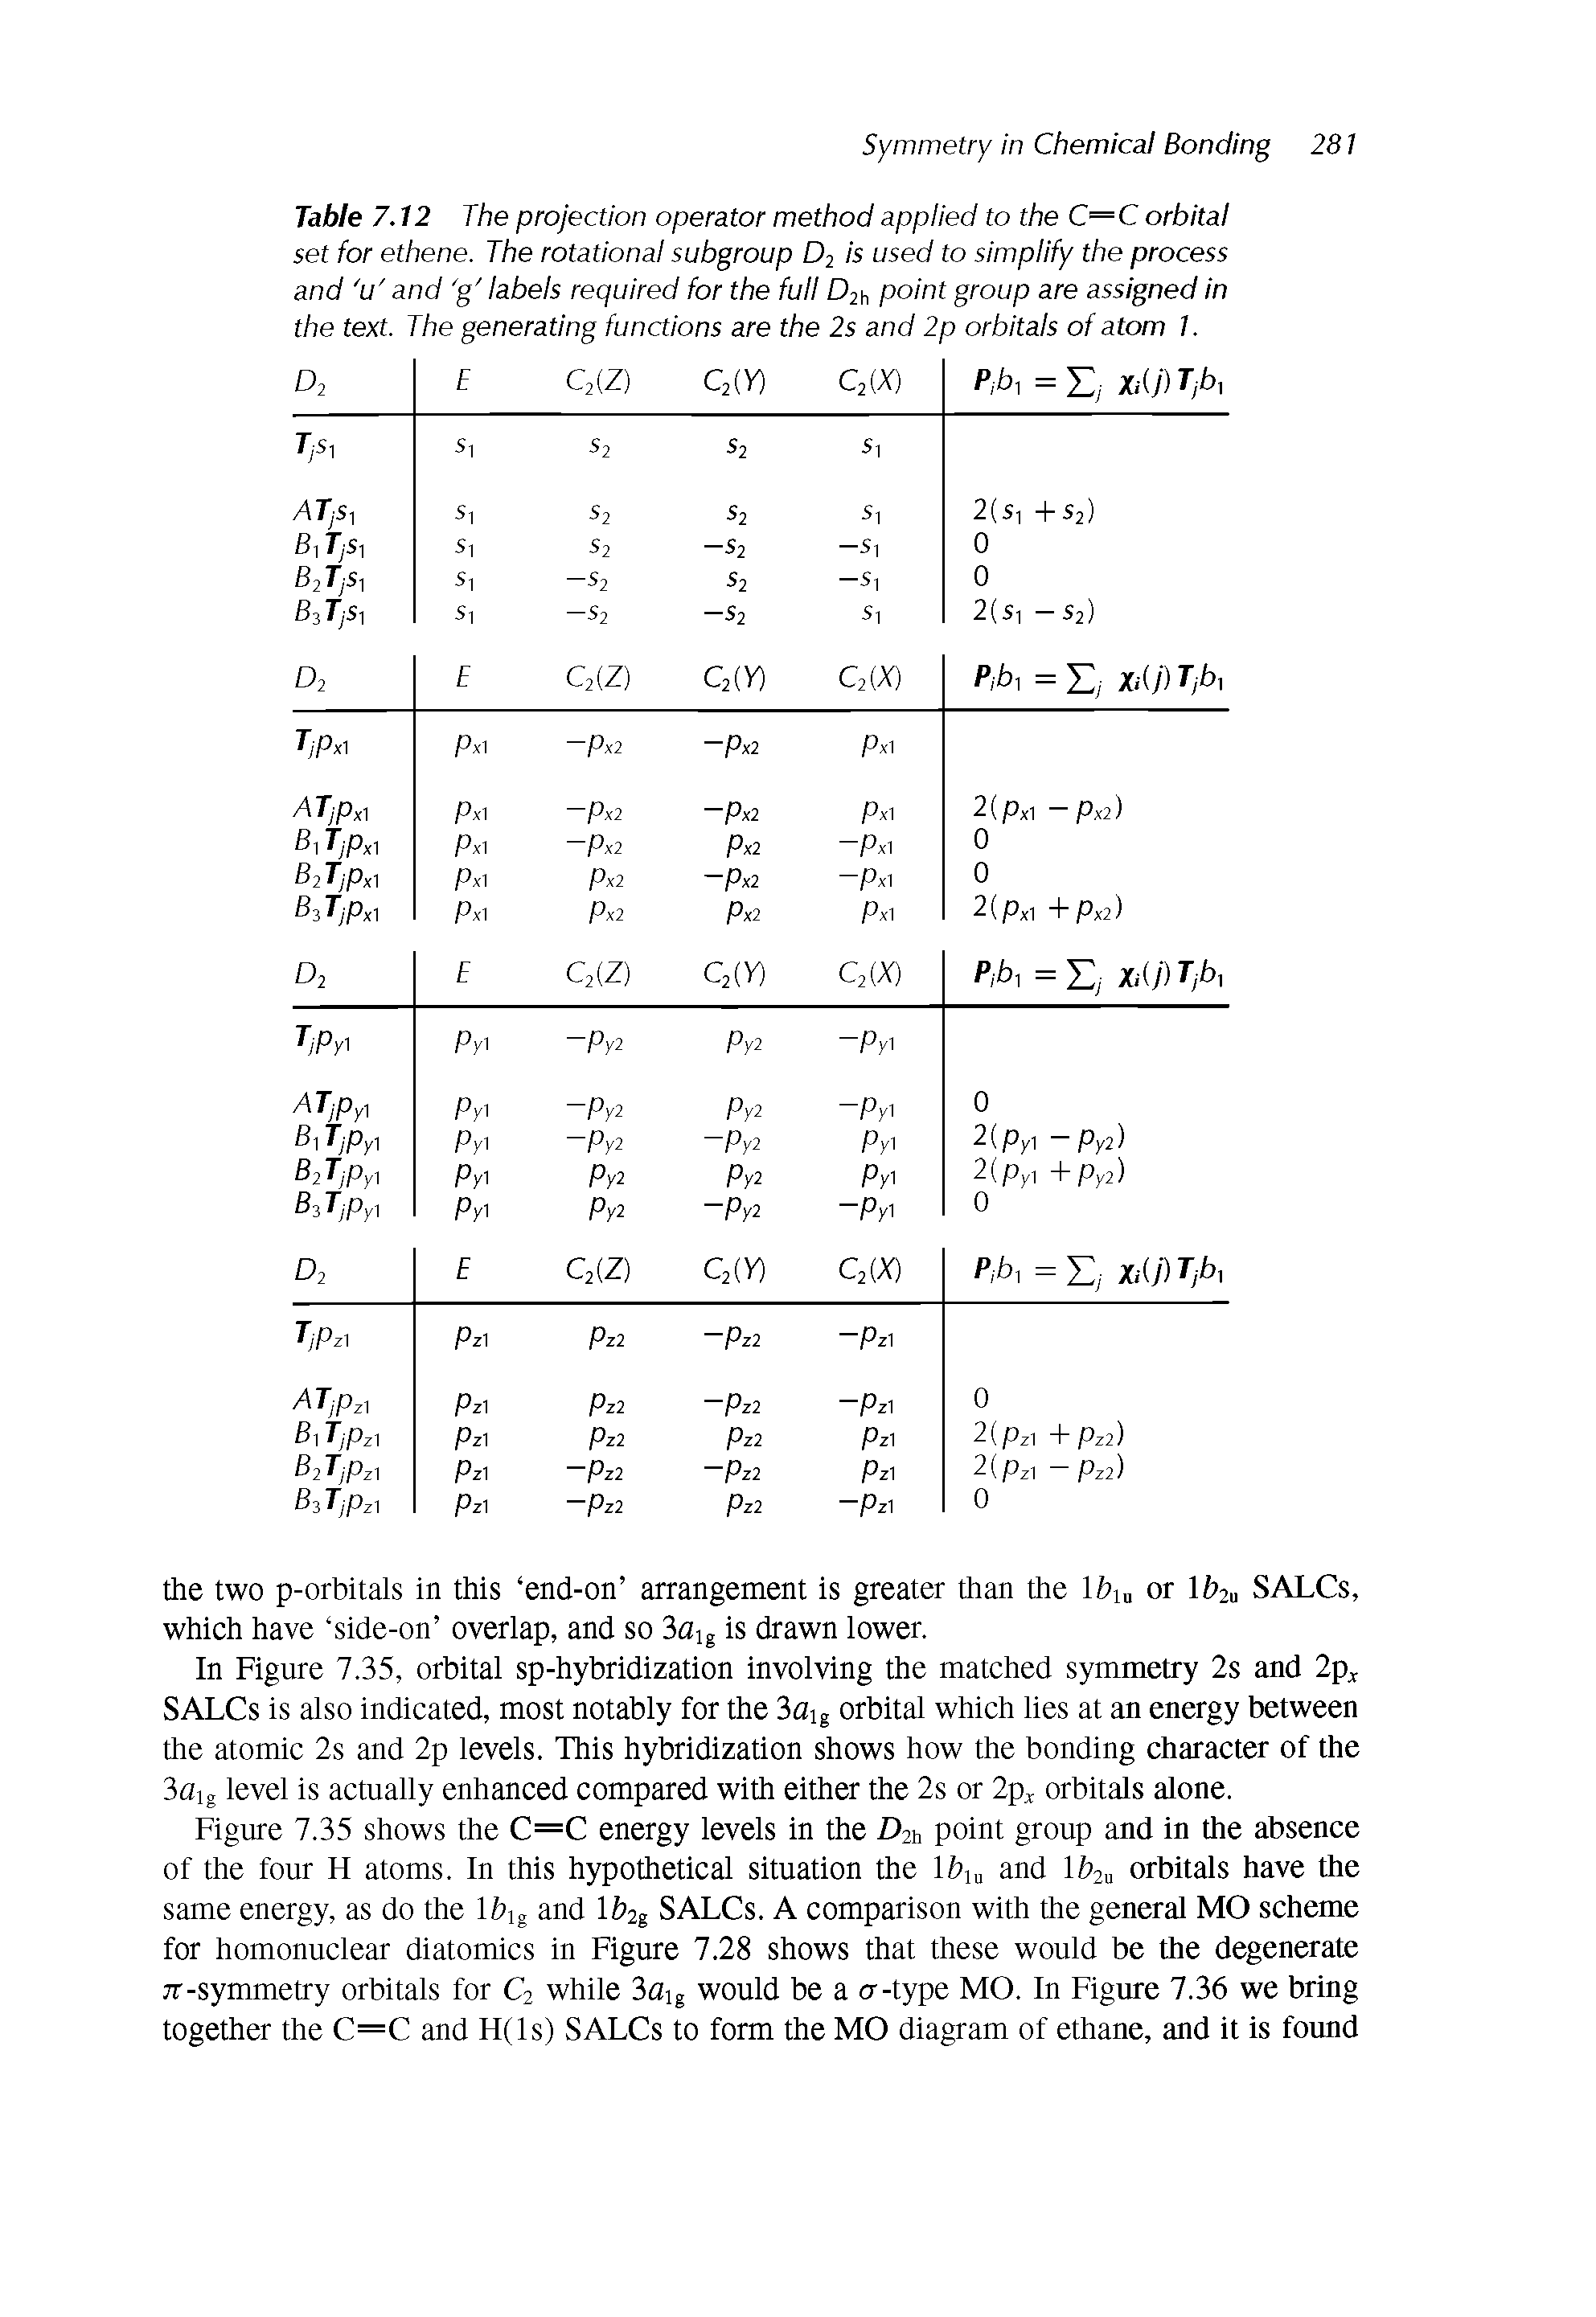 Table 7.12 The projection operator method applied to the C=C orbital set for ethene. The rotational subgroup D2 is used to simplify the process and u and g labels required for the full D2h point group are assigned in the text. The generating functions are the 2s and 2p orbitals of atom 1.